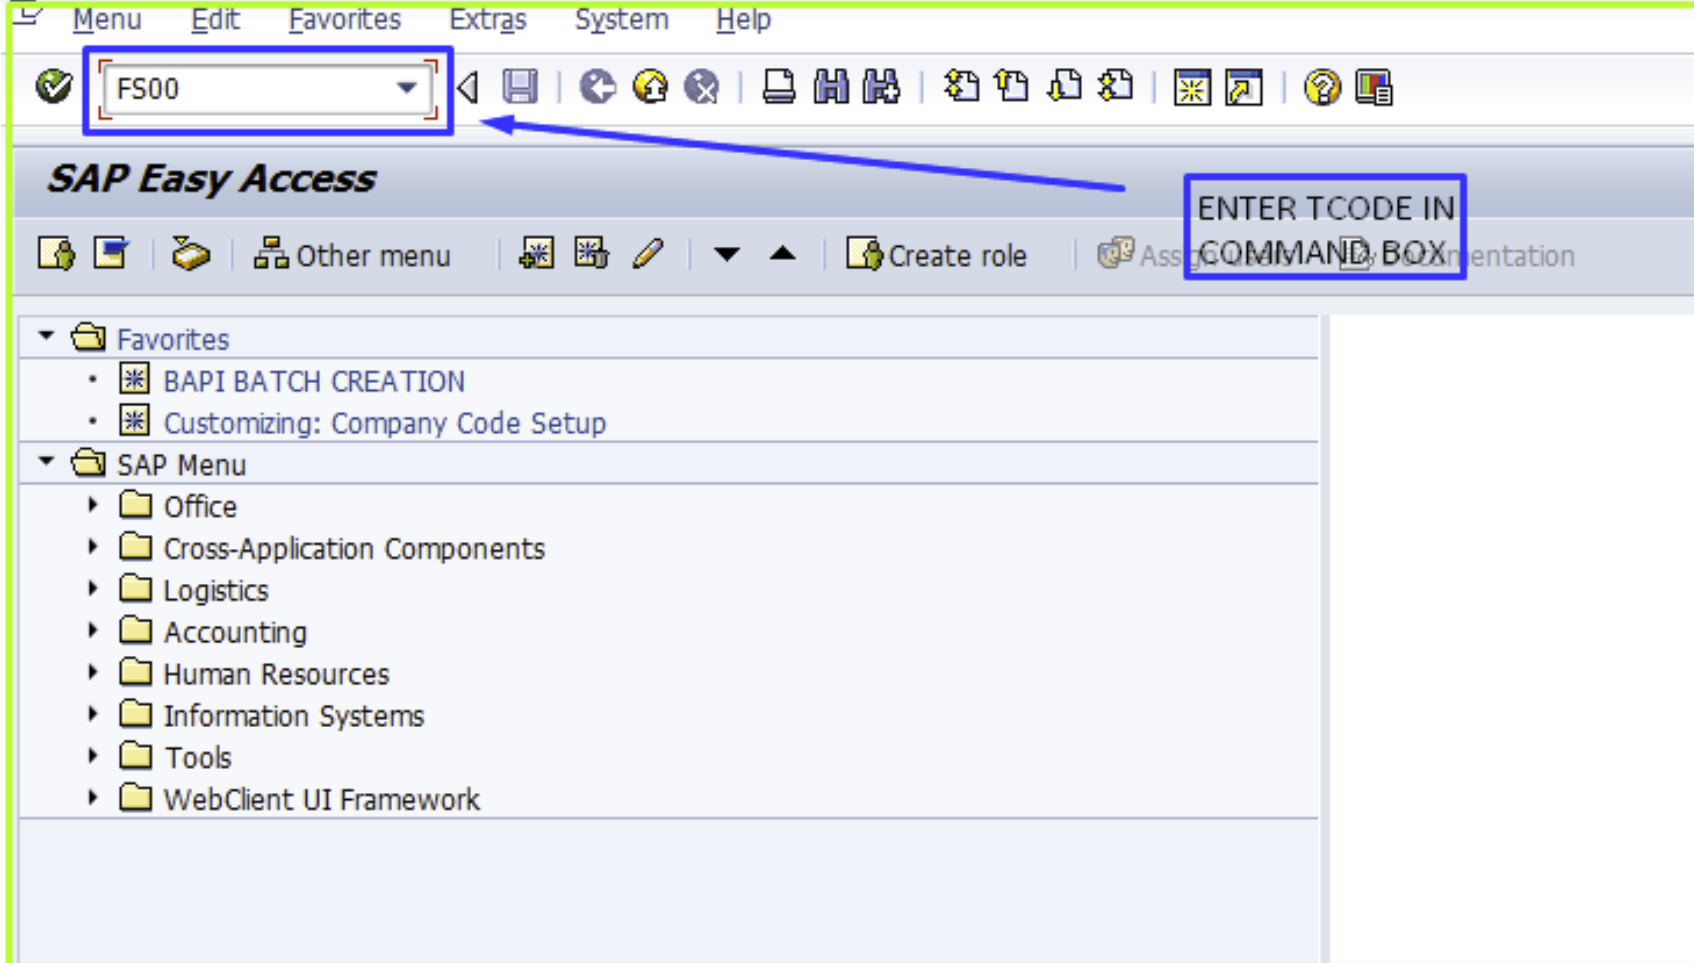 sap f110 account requires an assignment to a co object